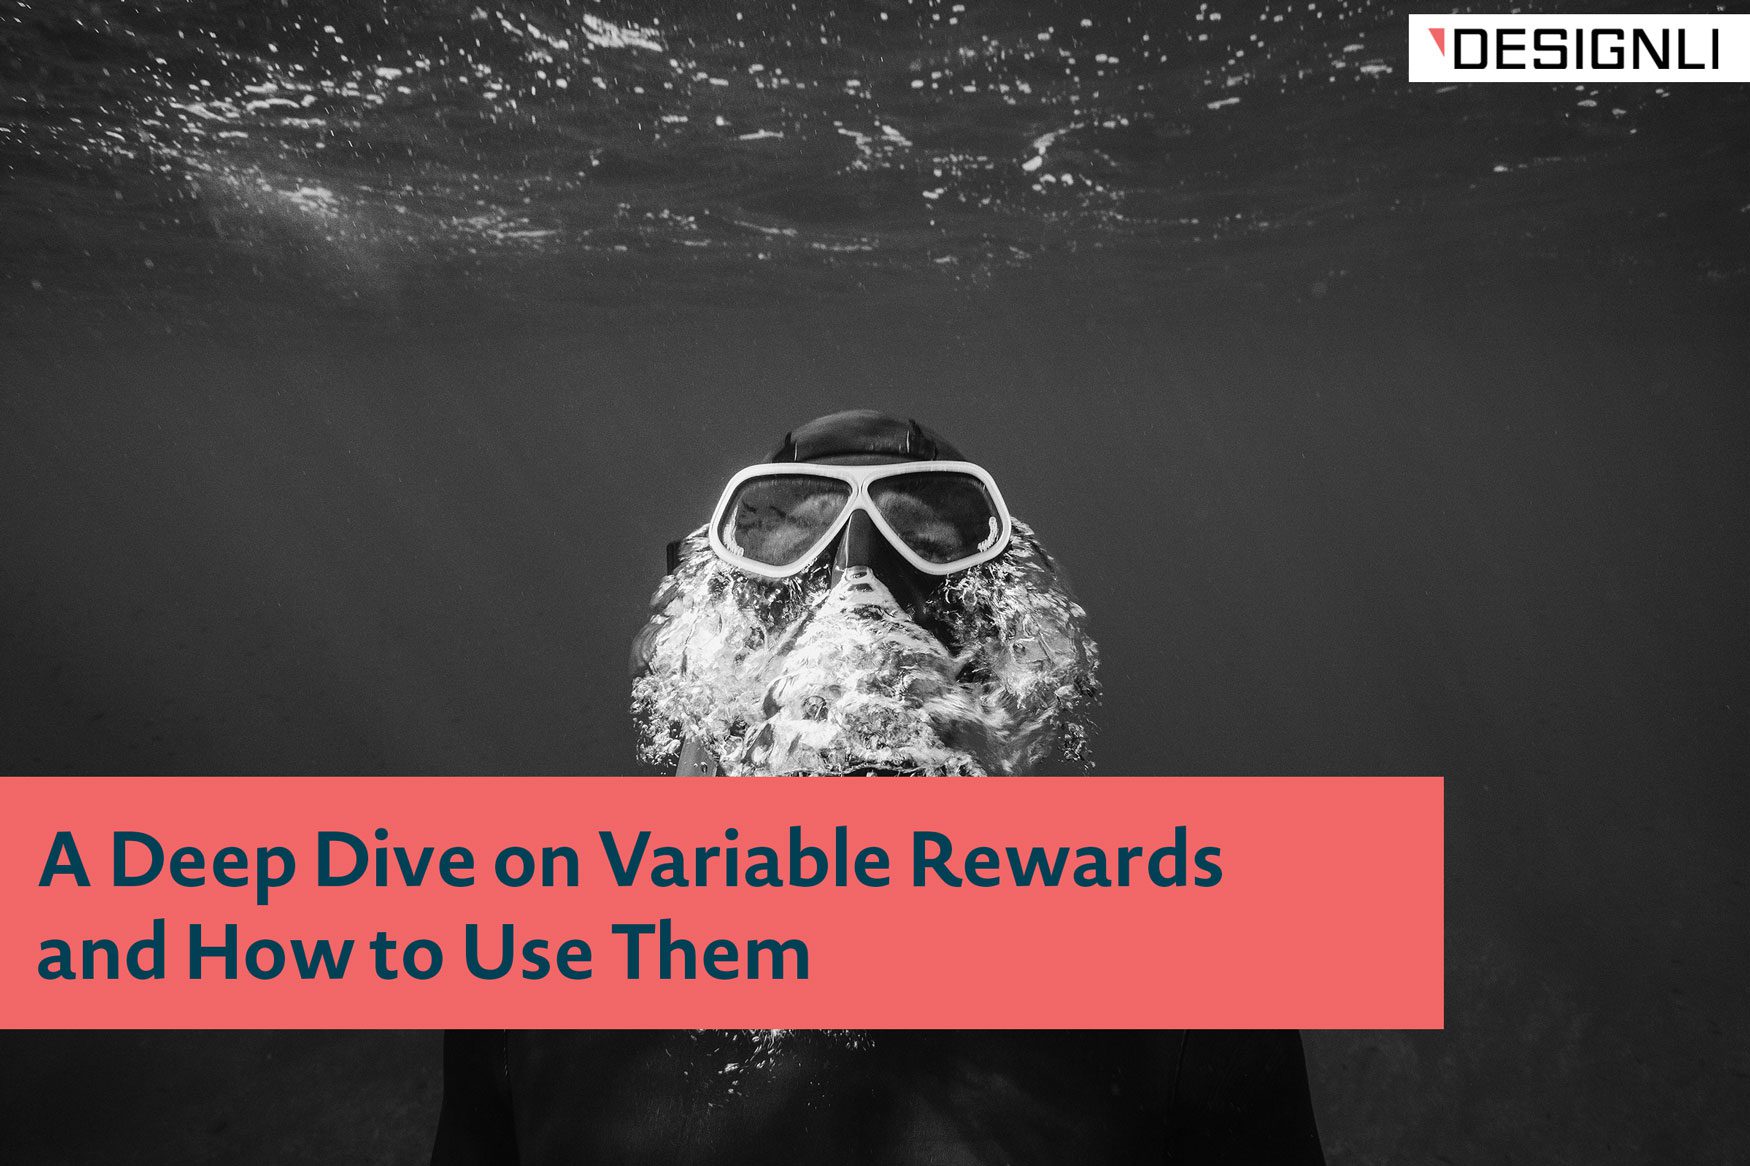 A Deep Dive on Variable Rewards and How to Use Them